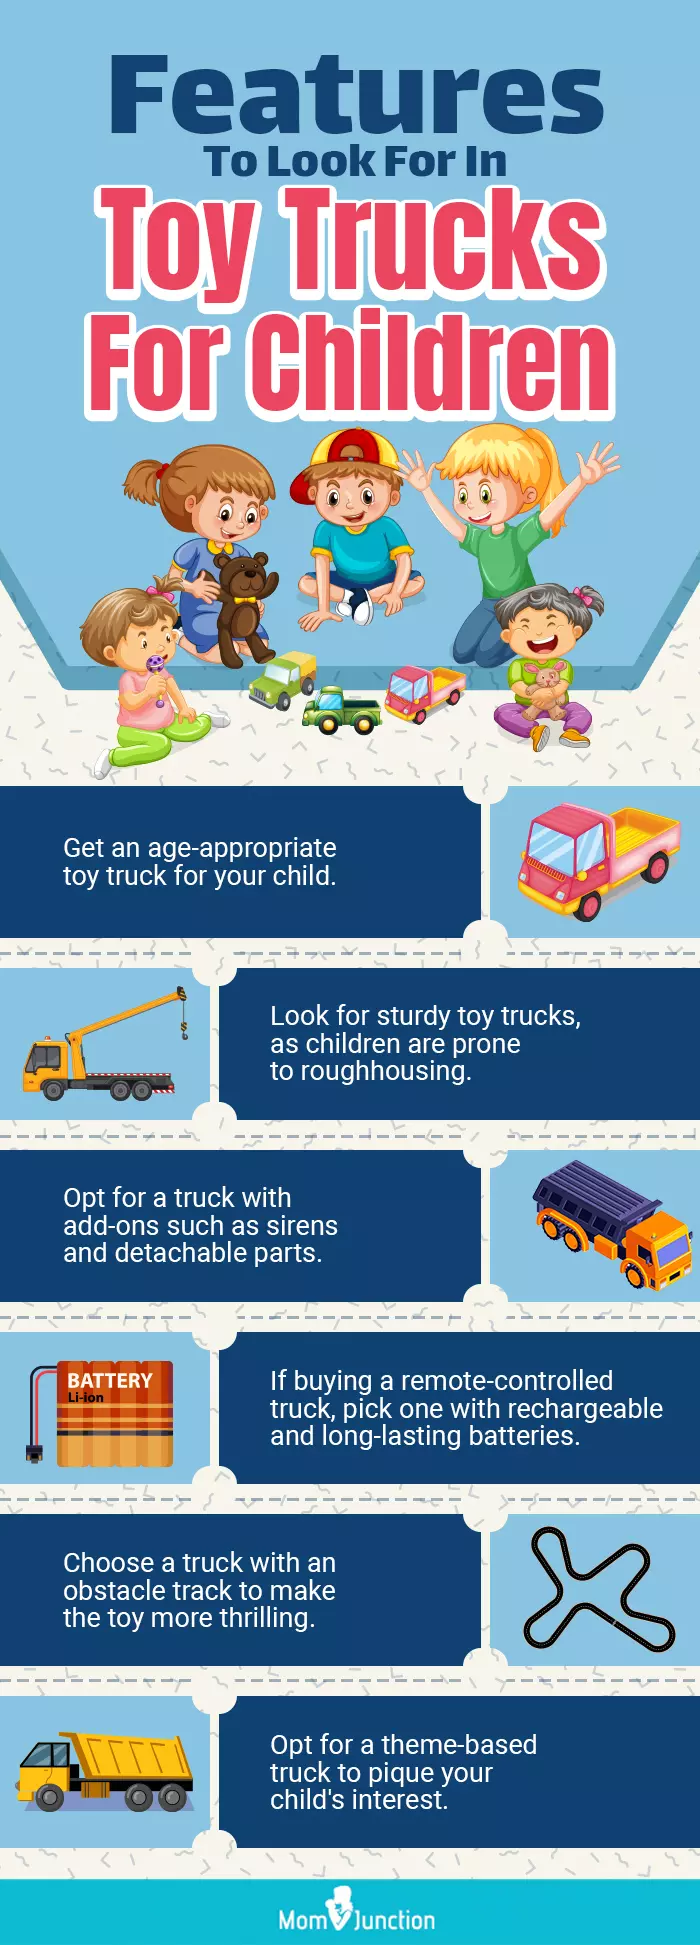 Features To Look For In Toy Trucks For Children